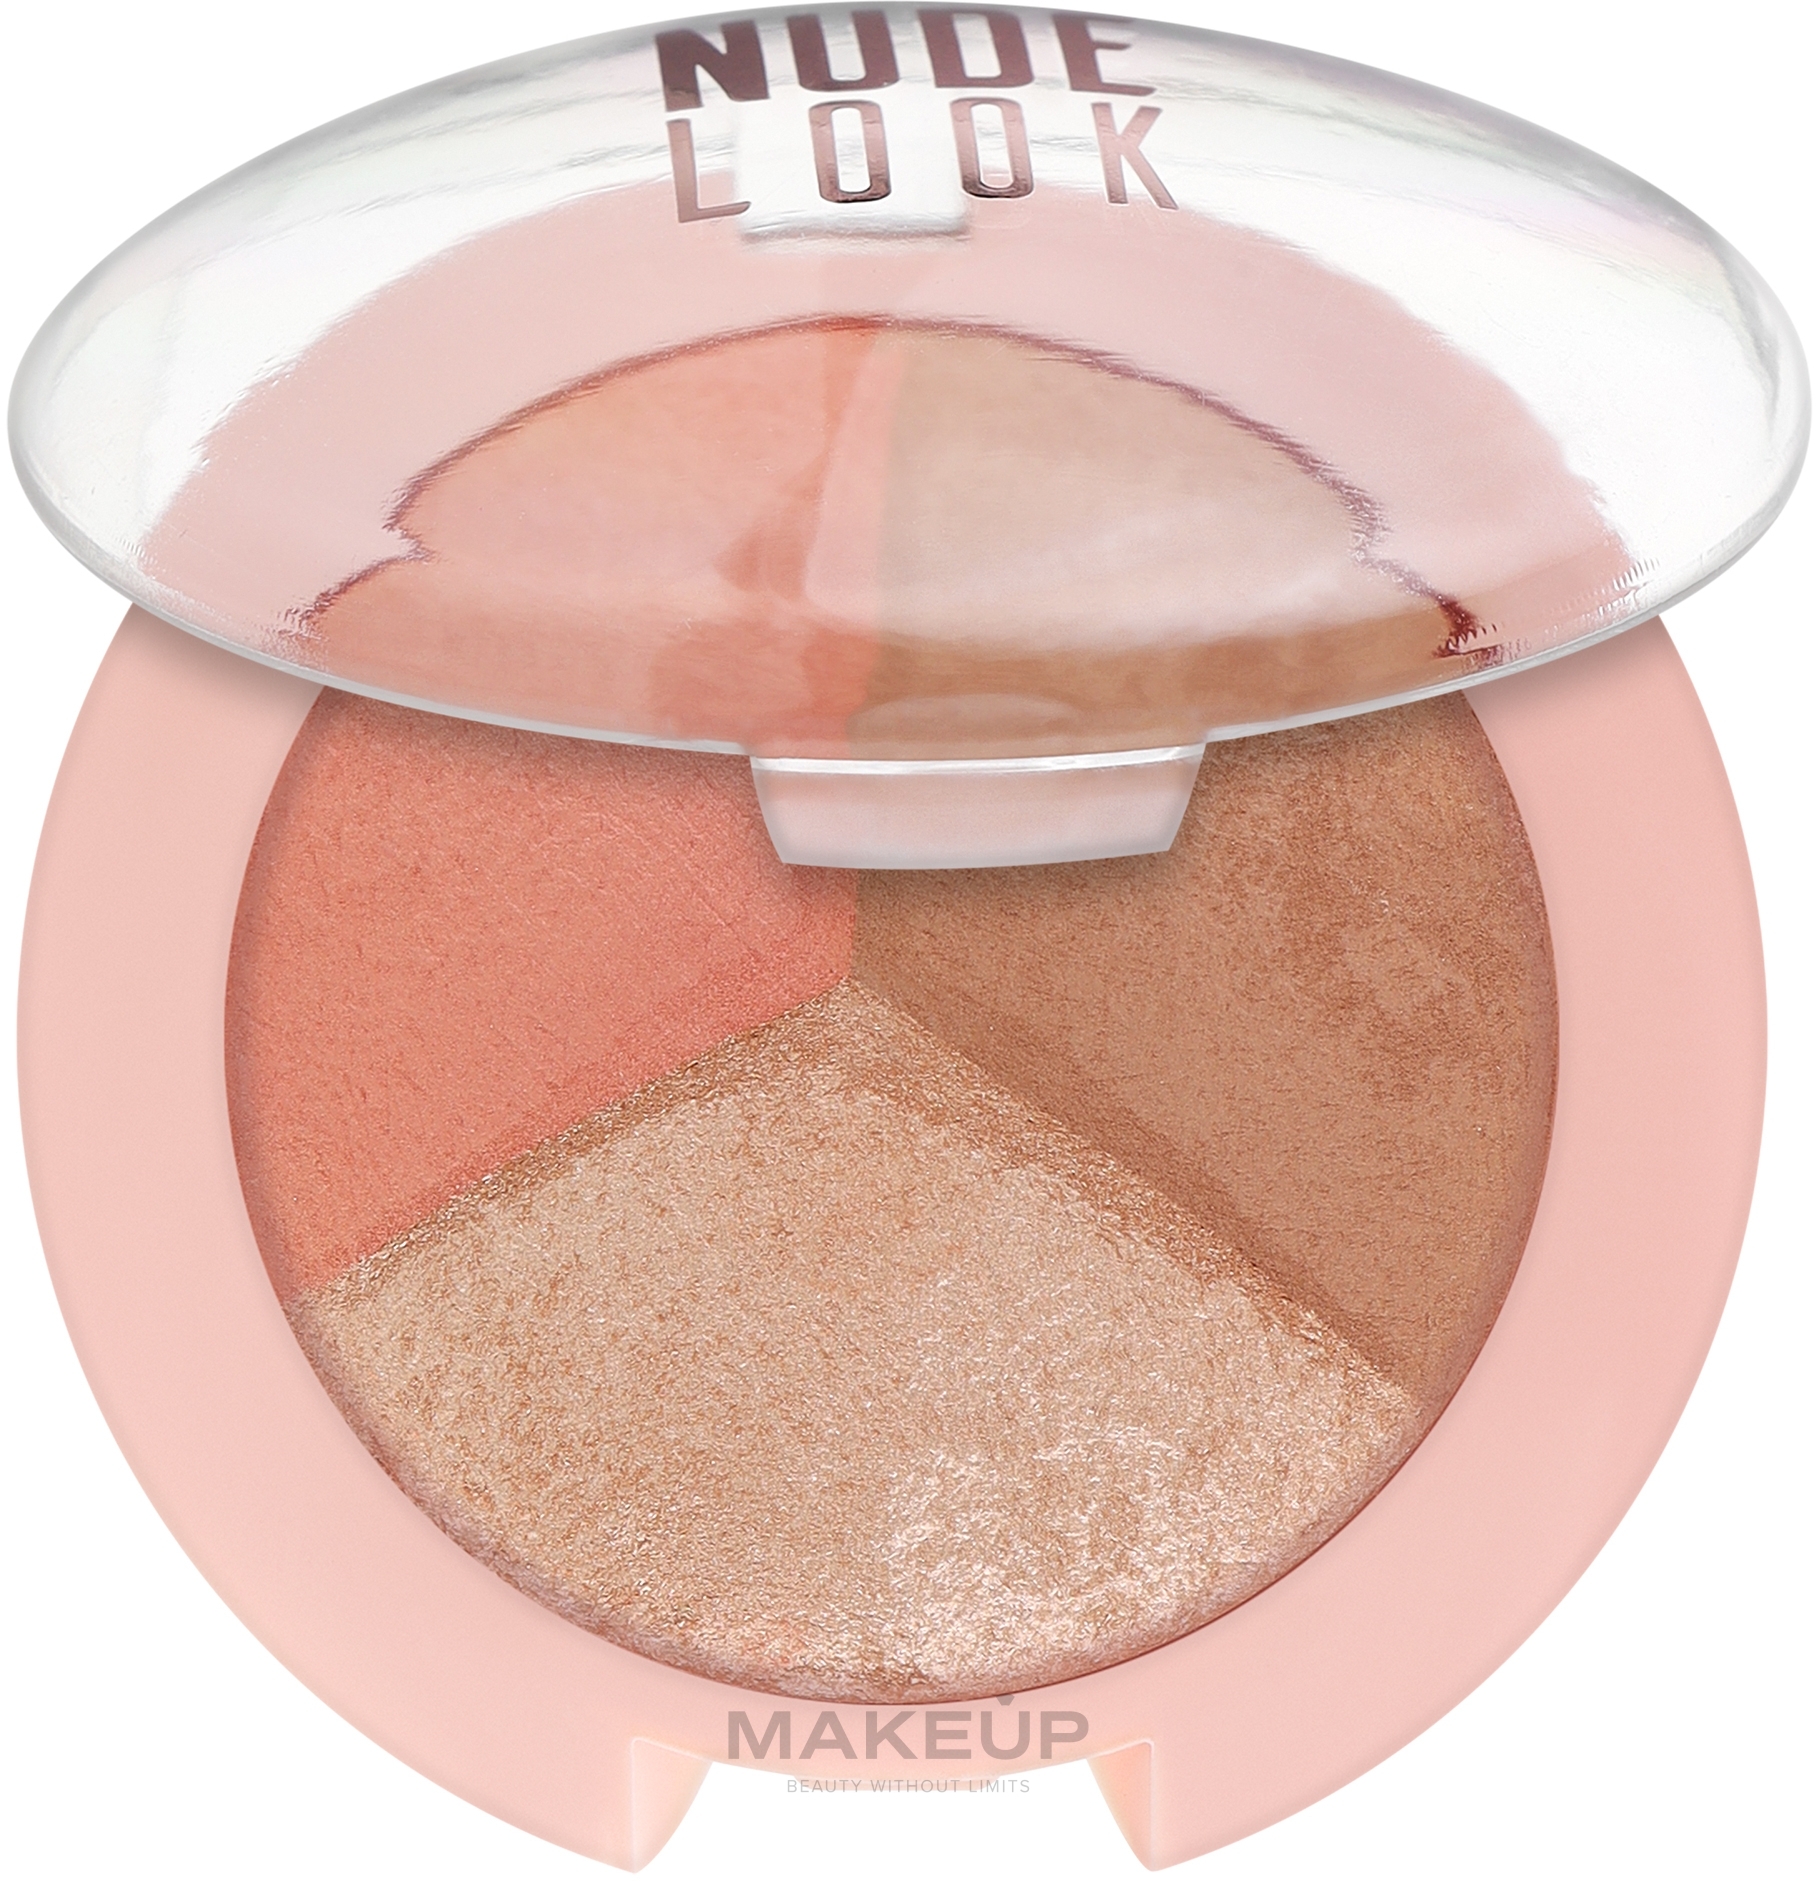 Face Powder 3 in 1 - Golden Rose Nude Look — photo 9.5 g